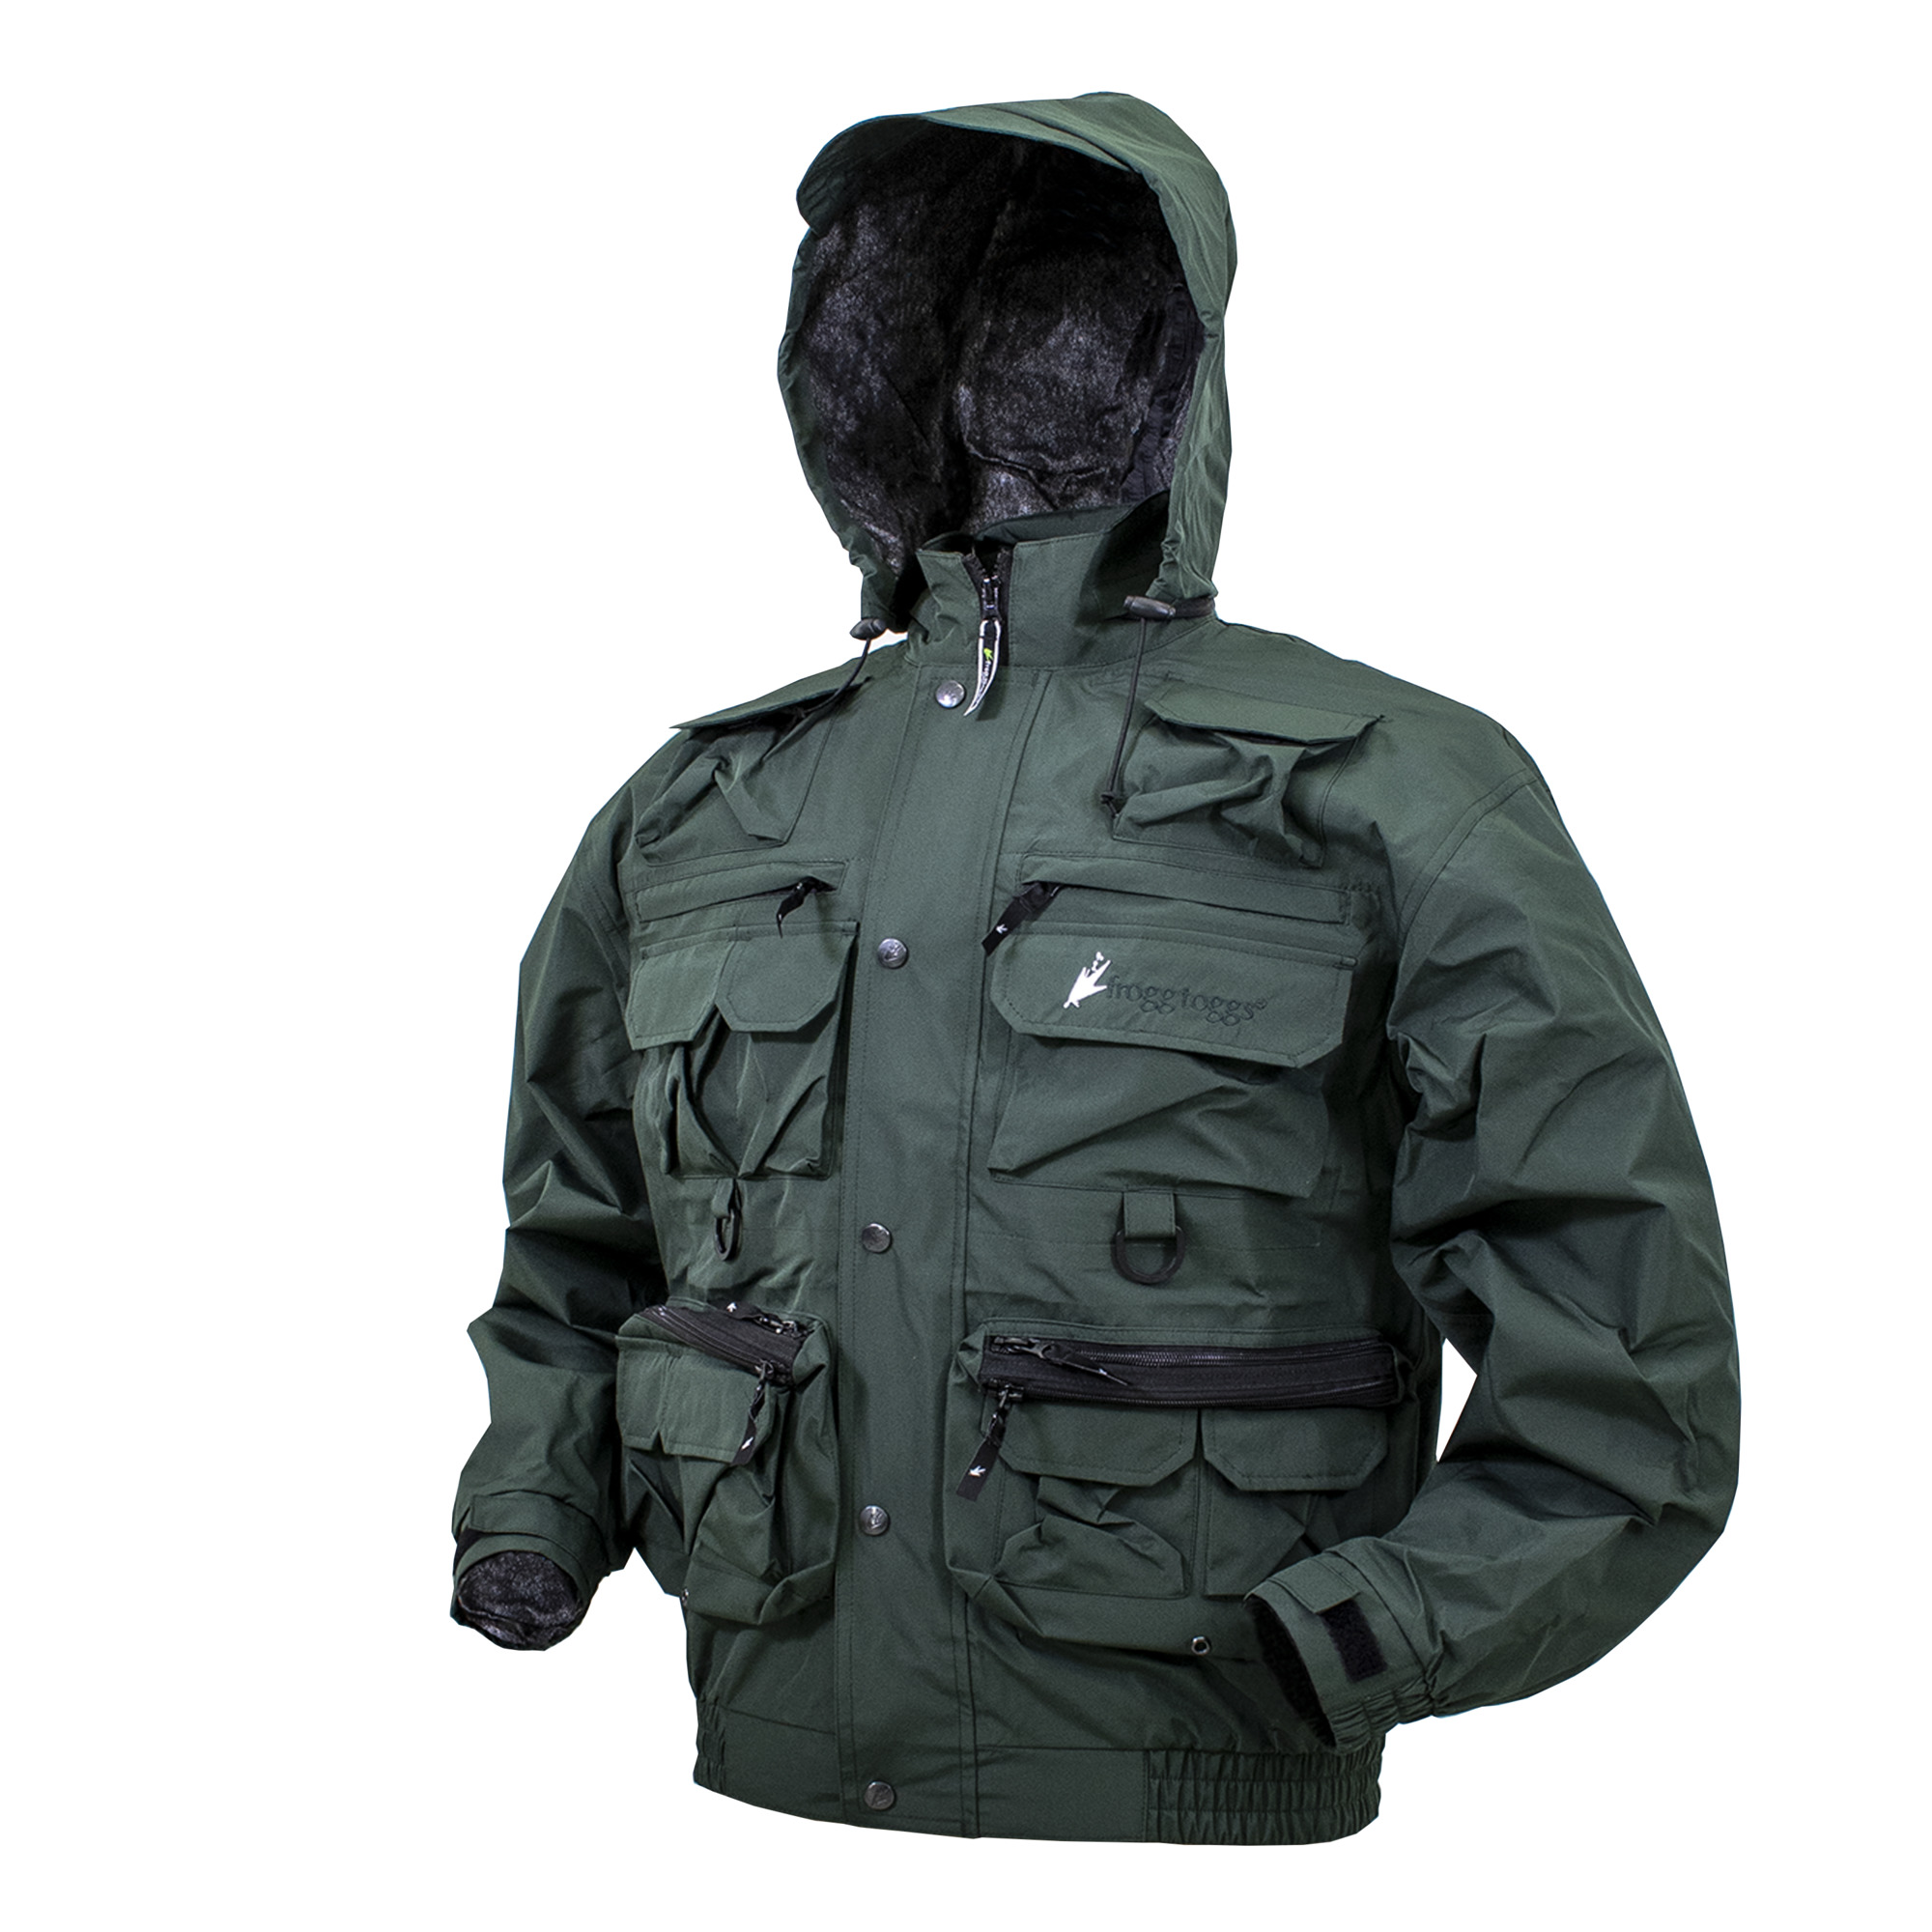 frogg toggs, Cascades Sportsman Pack Jacket, Size 3XL, Color Forest Green, Model NT1103-09XXX